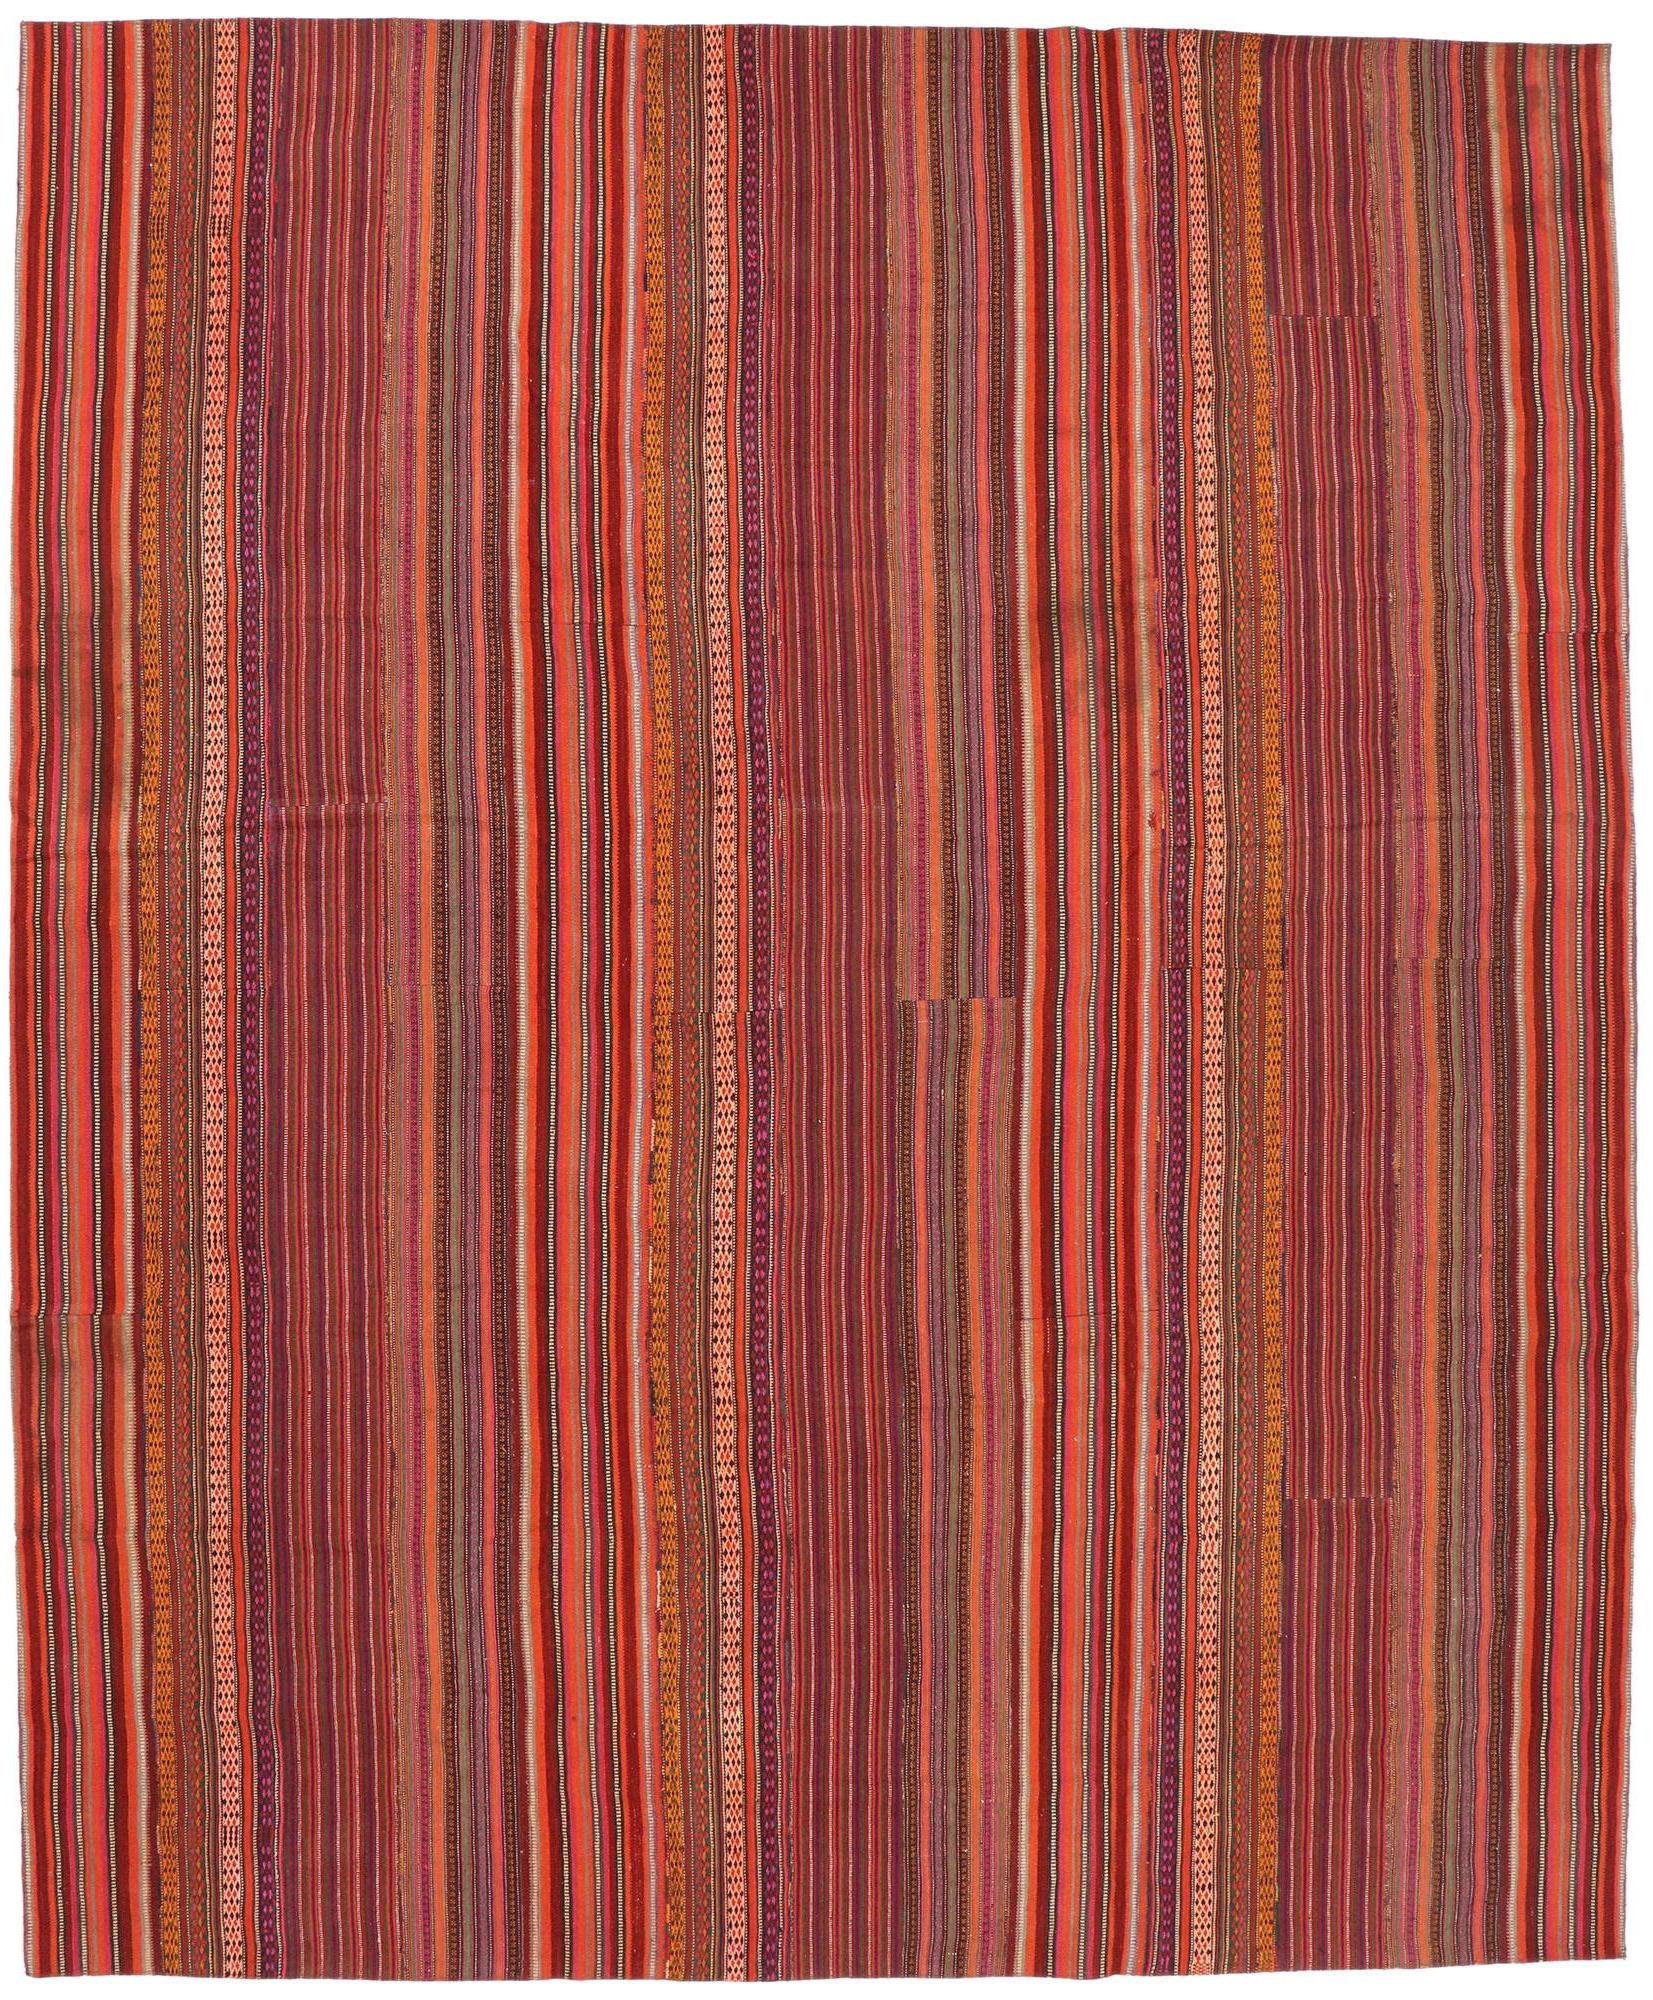 Hand-Woven Vintage Turkish Striped Kilim Rug with Modern Rustic Cabin Style 